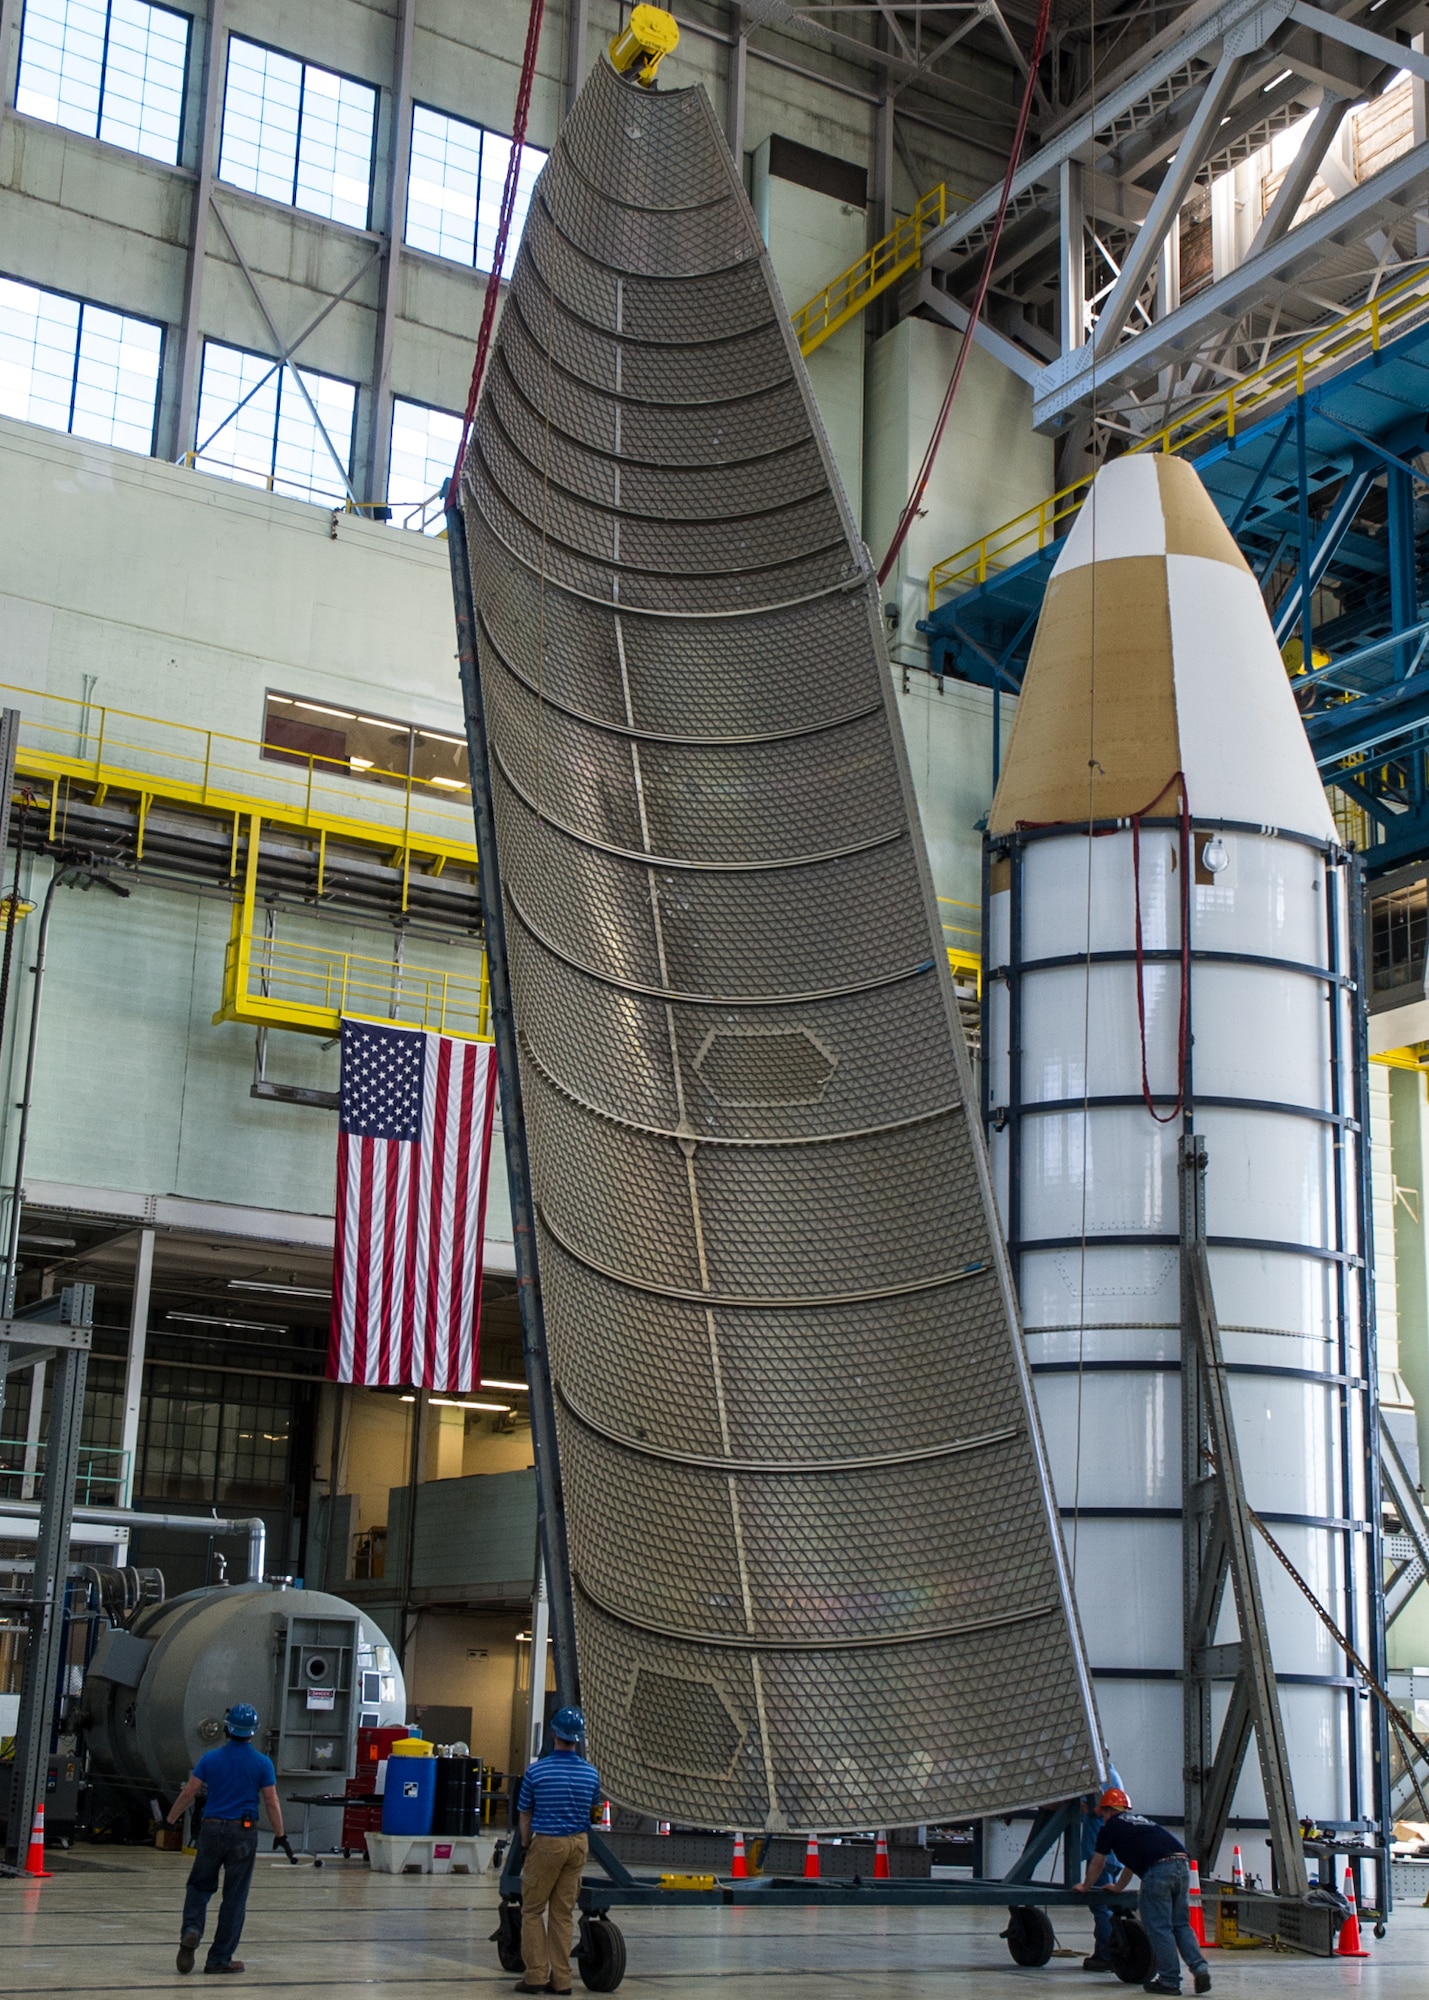 DAYTON, Ohio - Air Force Research Laboratory engineers and technicians from the Structural Validation Branch of the Aerospace Vehicles Division, Aerospace Systems Directorate, partnered with museum restoration crews to assemble a 60 foot tall payload fairing from the Titan IVB space launch vehicle between  Feb. 29-March 2, 2016. The impressive Titan IVB, with roots going back to the early days of U.S. Air Force and civil space launch, is significant as the museum looks to share the story of USAF and USAF-enabled space operations in its Space Gallery. The Titan IVB will be on display in the new fourth building at the National Museum of the U.S. Air Force which opens to the public on June 8. (U.S. Air Force photo by Ken LaRock)